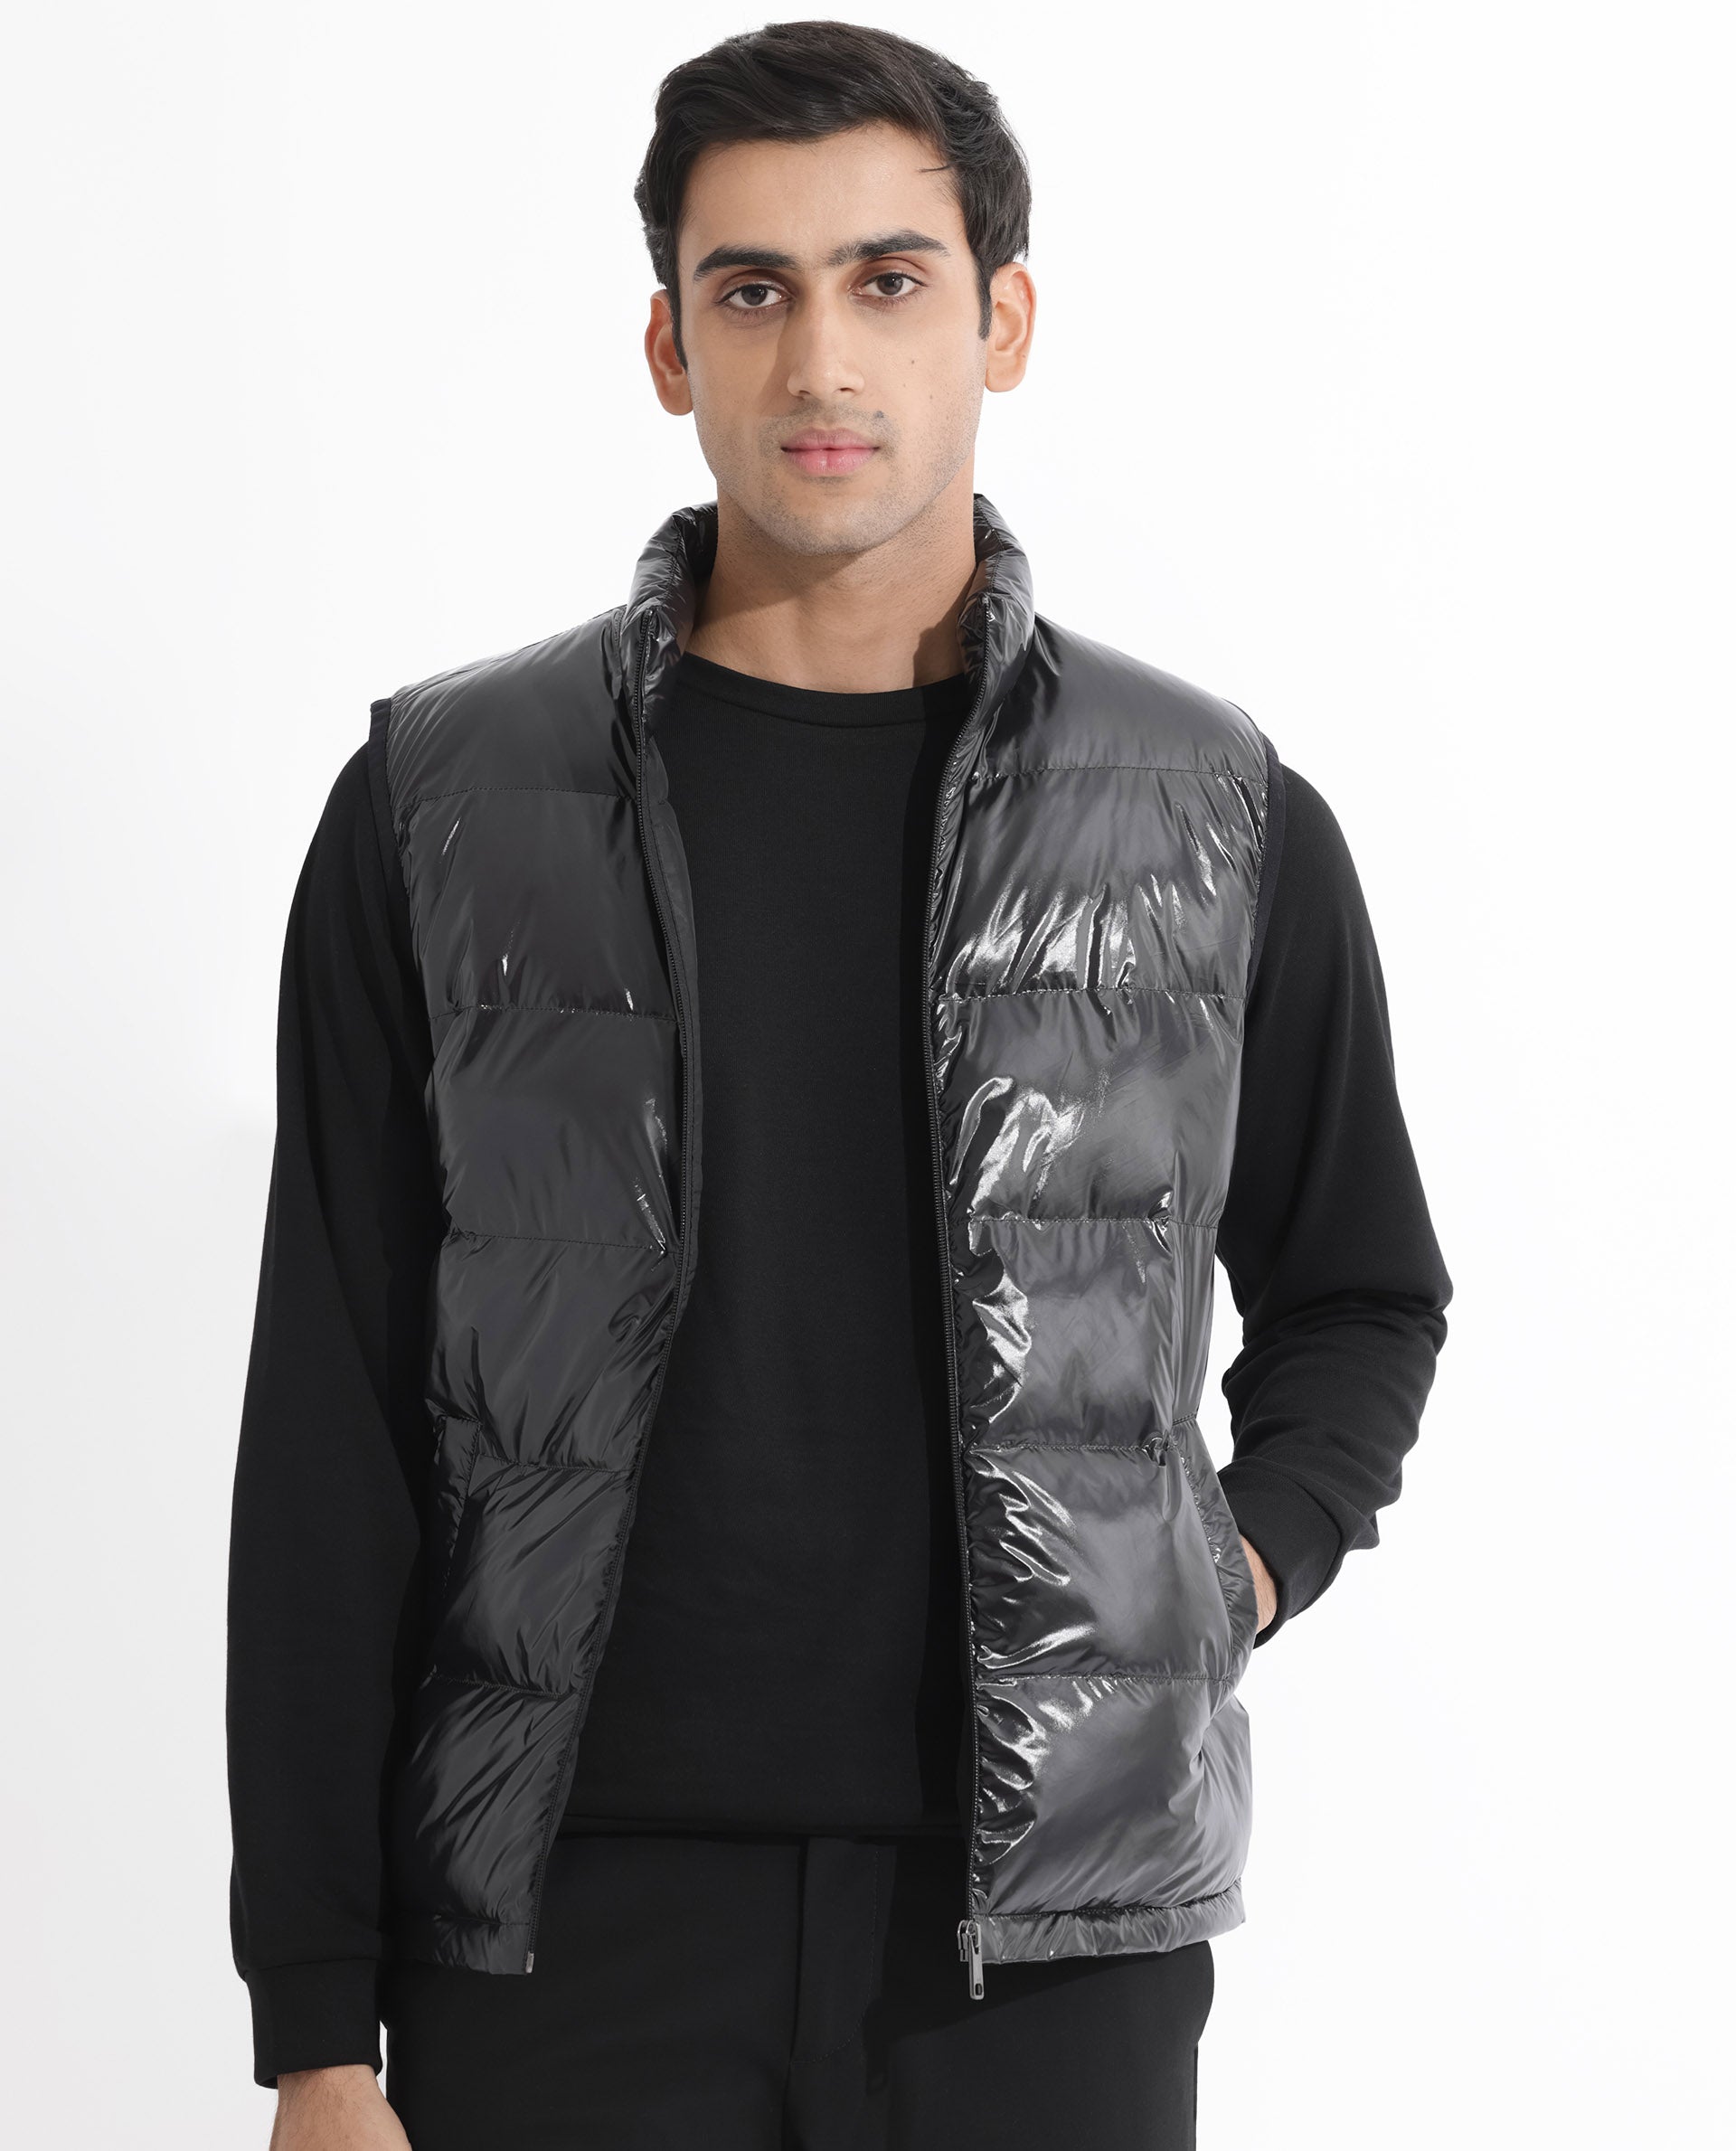 Men's Half sleeves Red Quilted Bomber Jacket